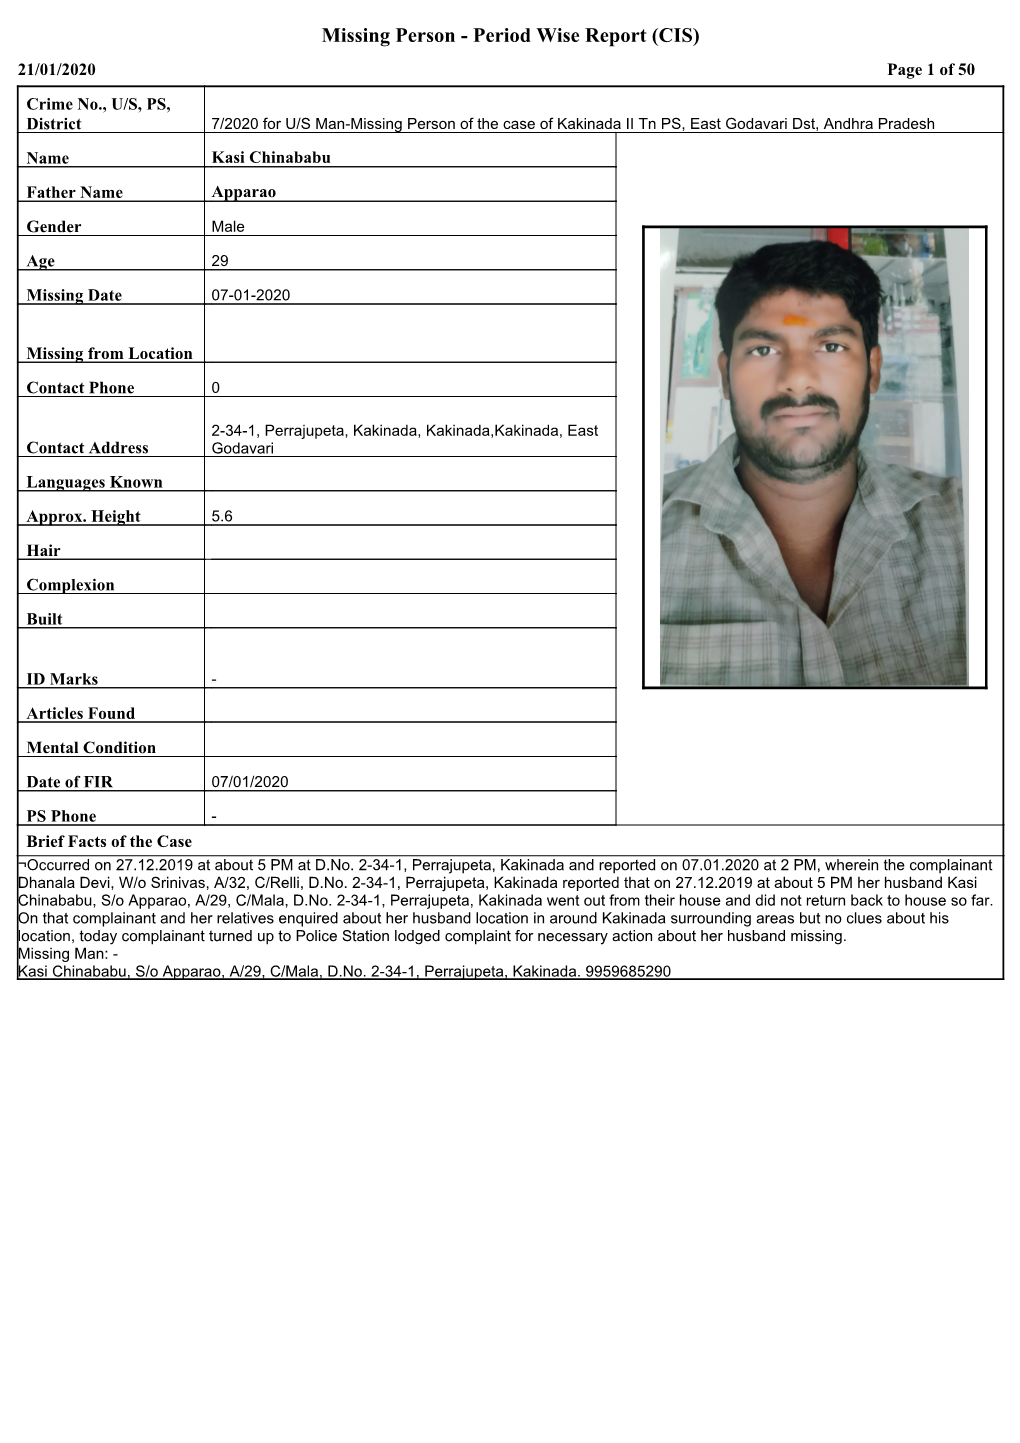 Missing Person - Period Wise Report (CIS) 21/01/2020 Page 1 of 50